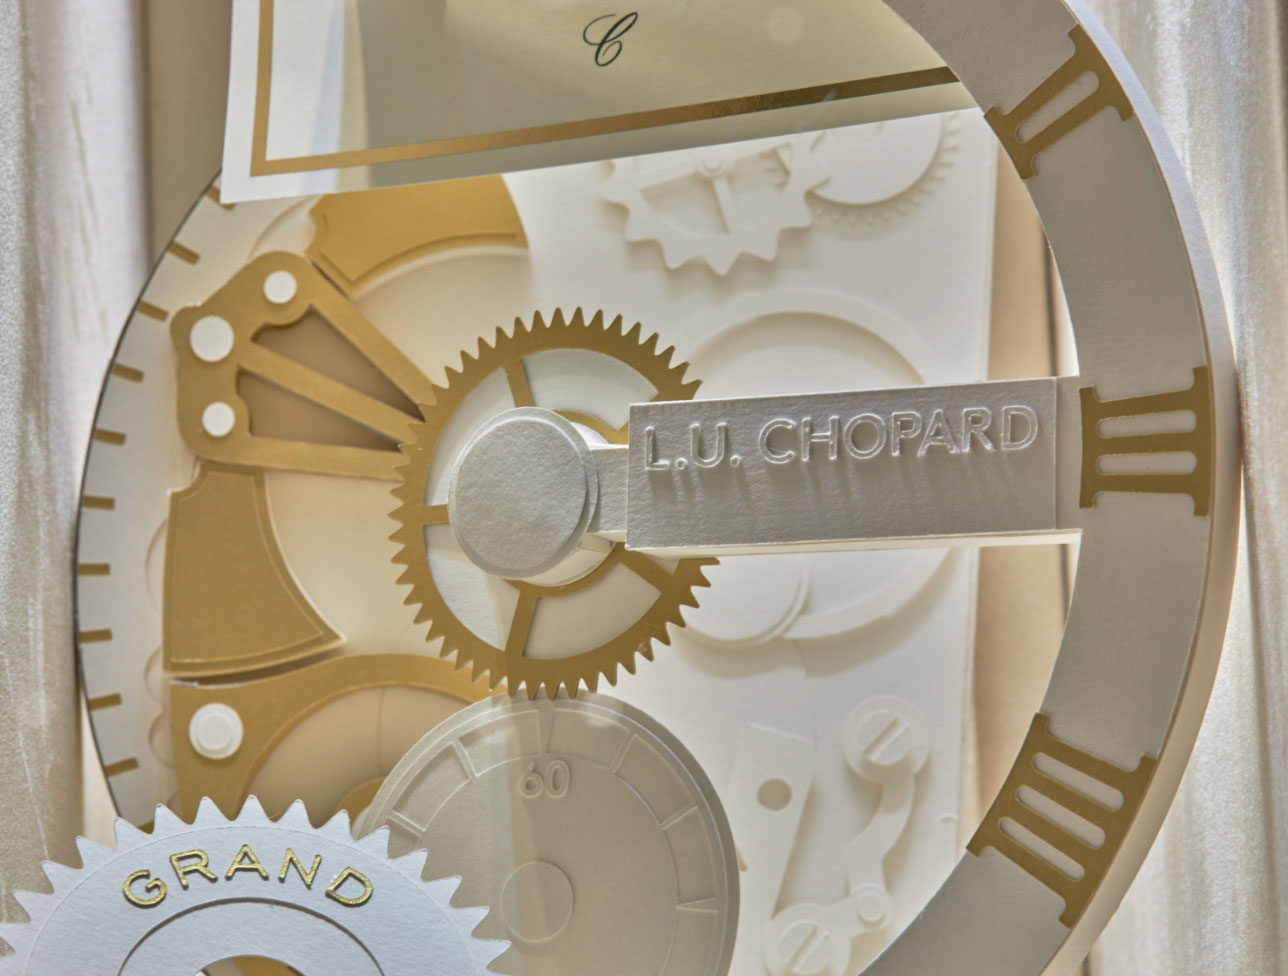 Chopard - Ethical Gold